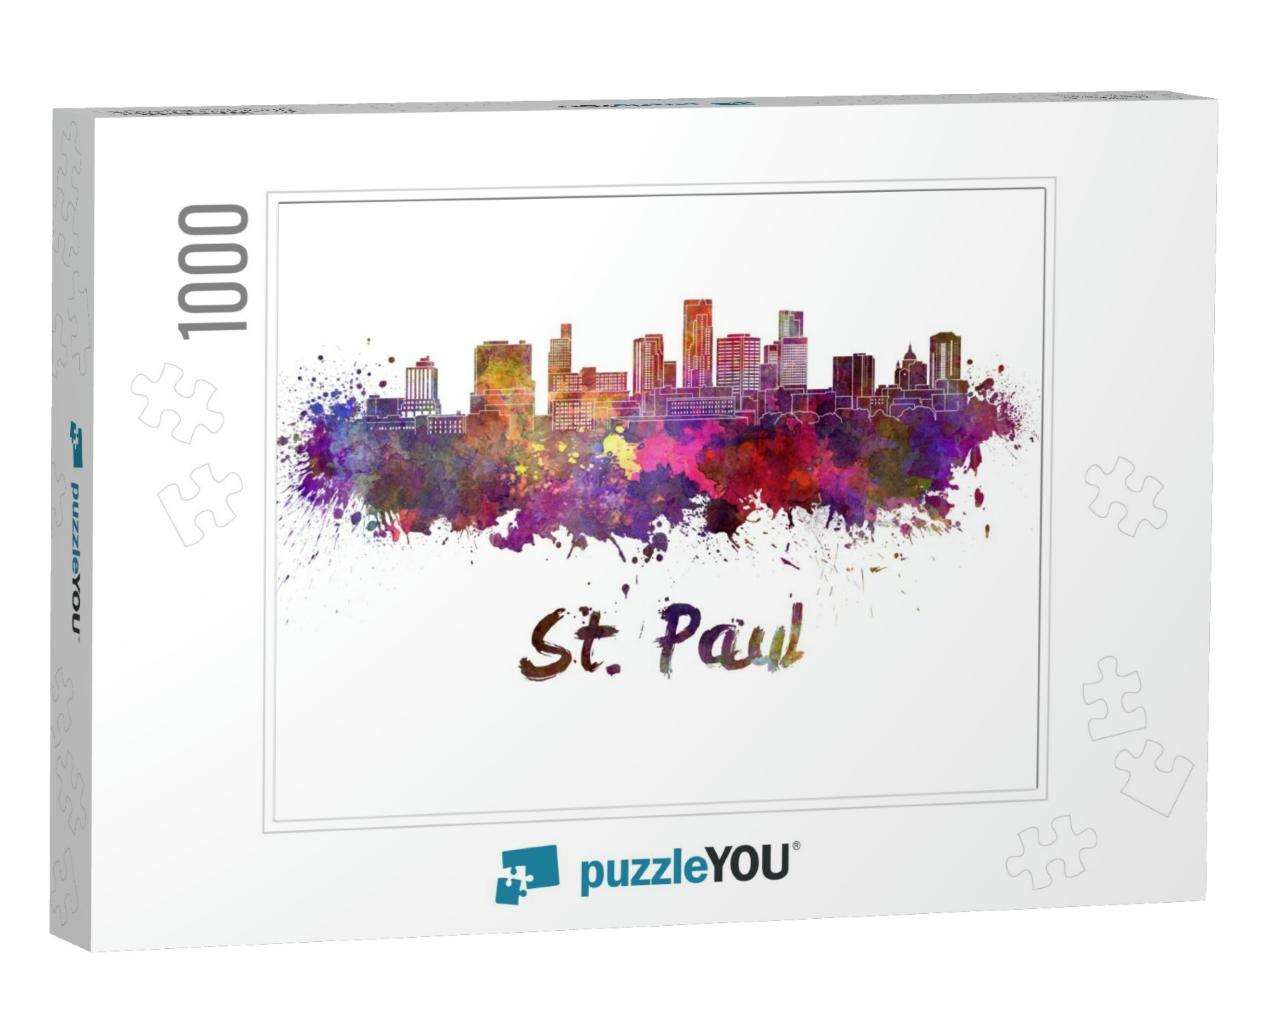 Saint Paul Skyline in Watercolor Splatters with Clipping... Jigsaw Puzzle with 1000 pieces